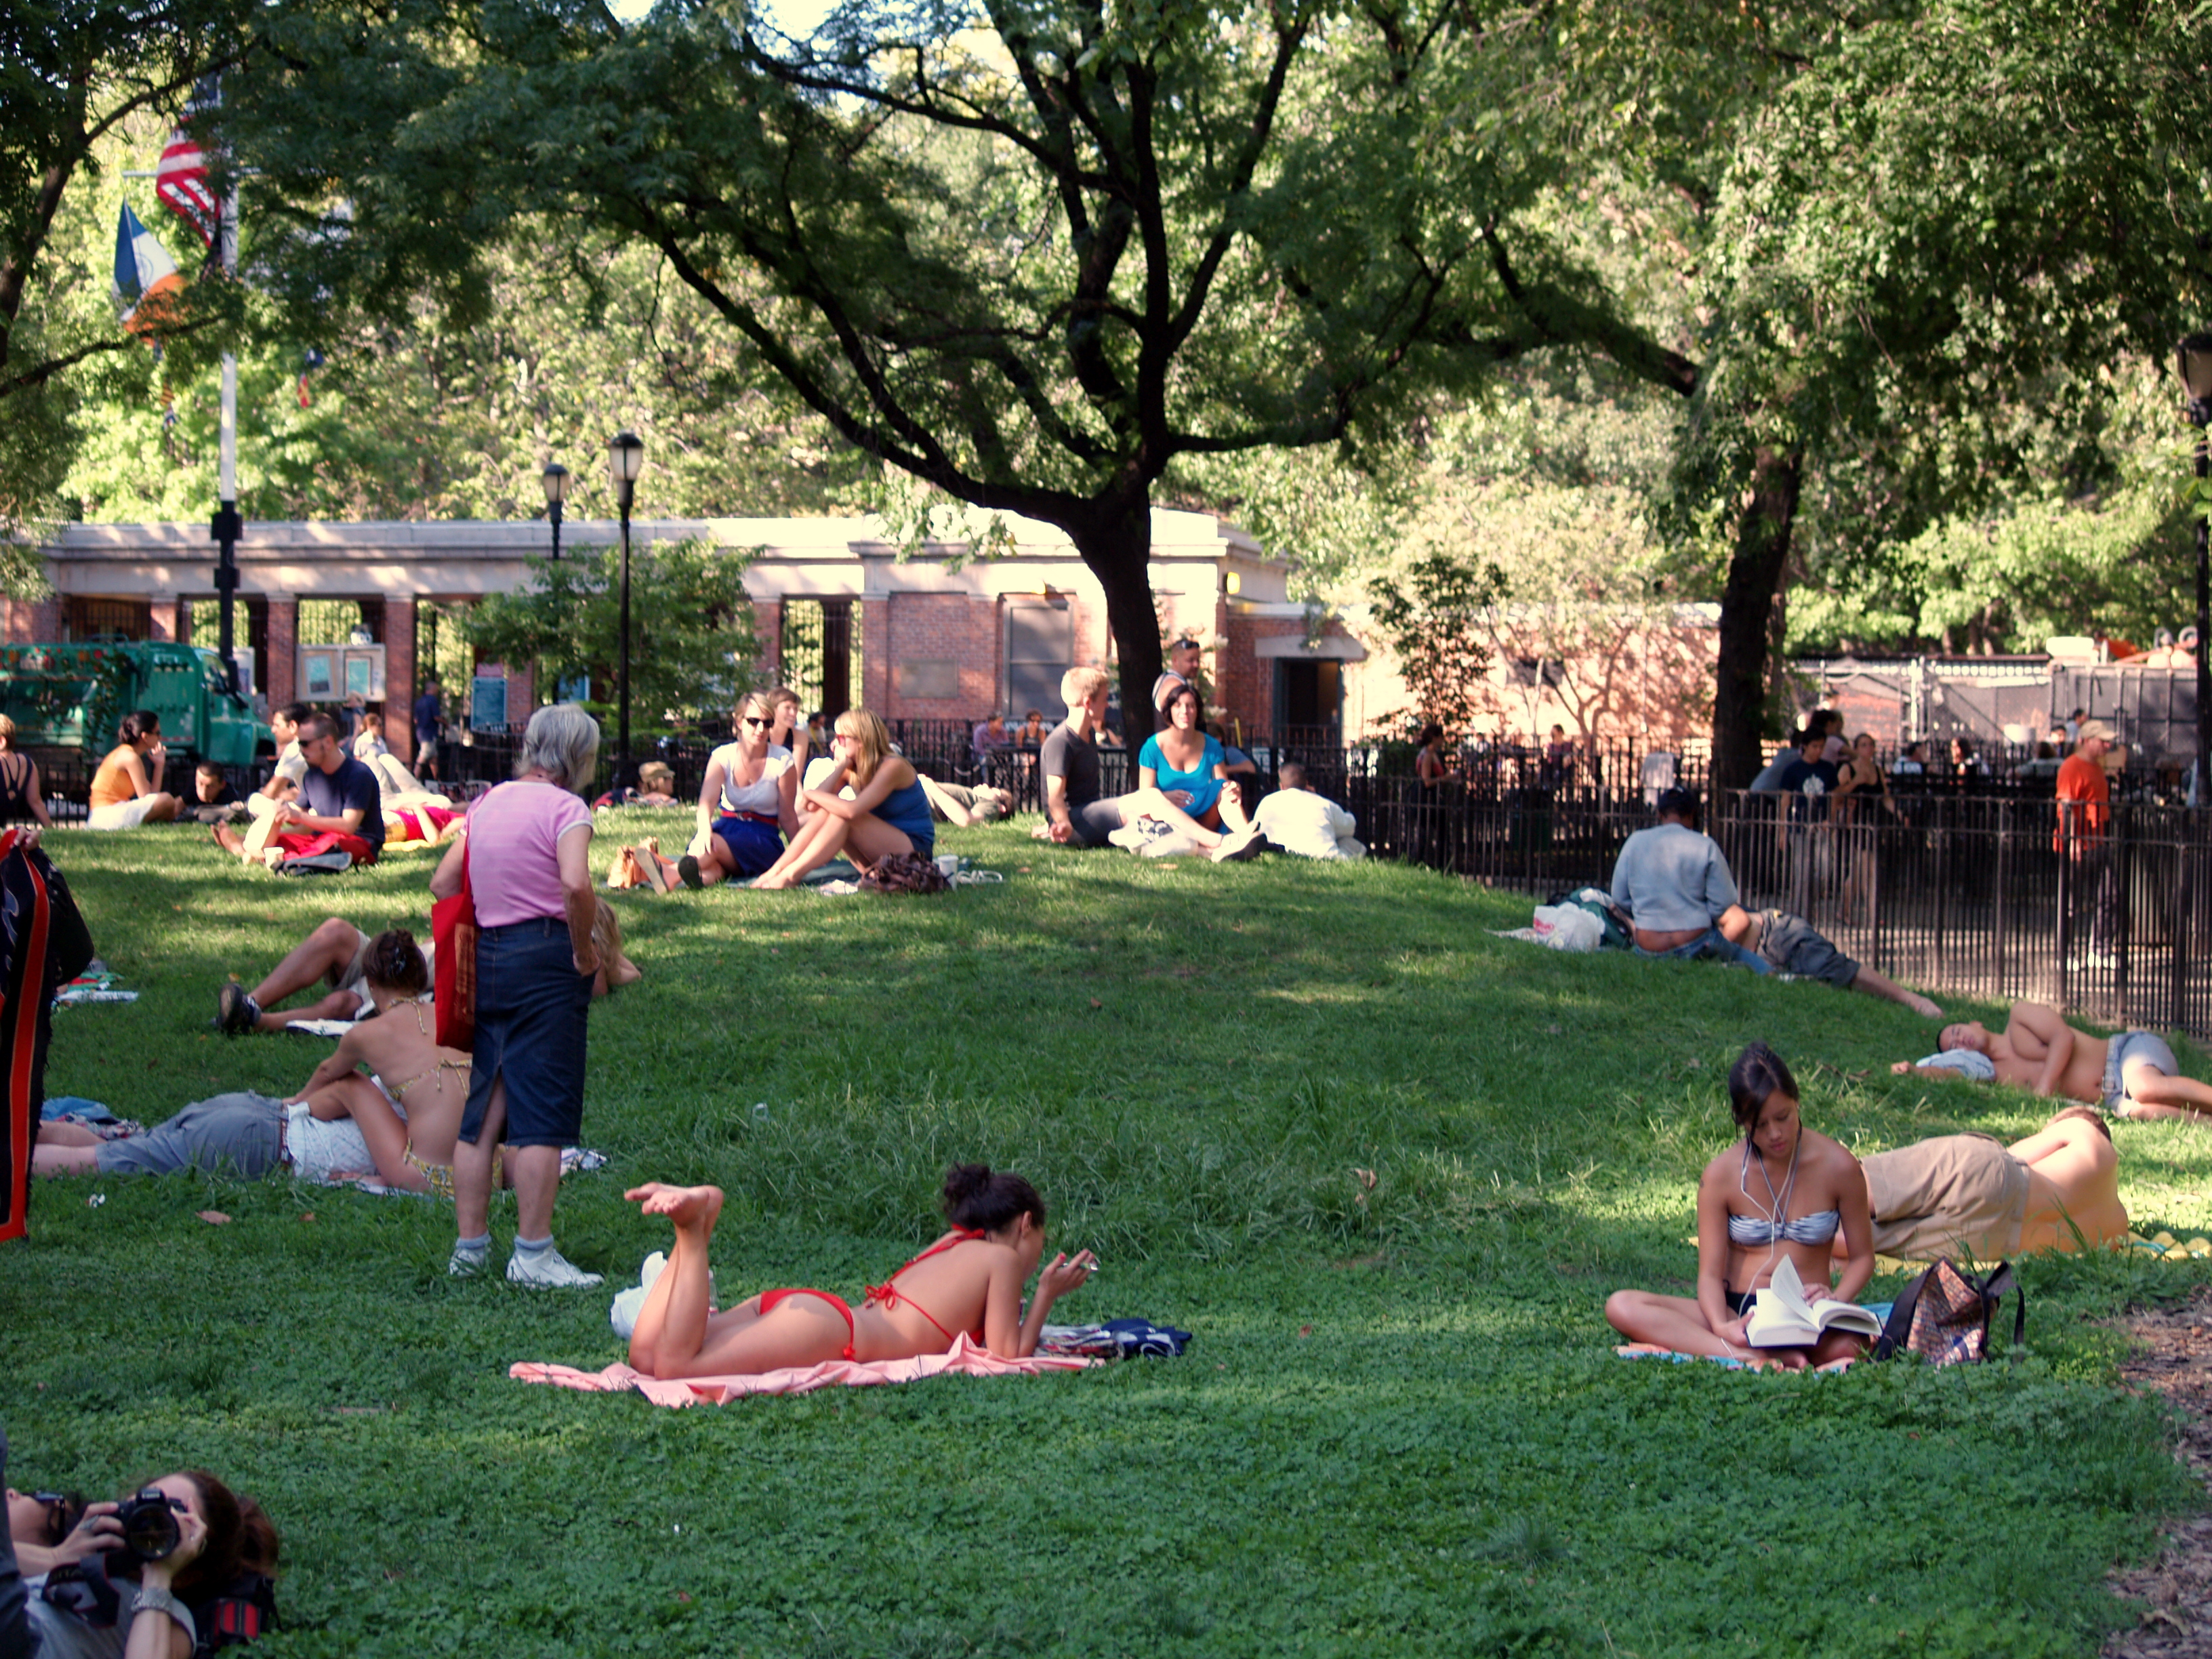 A person enjoying a leisure activity, such as reading a book or relaxing in a park.